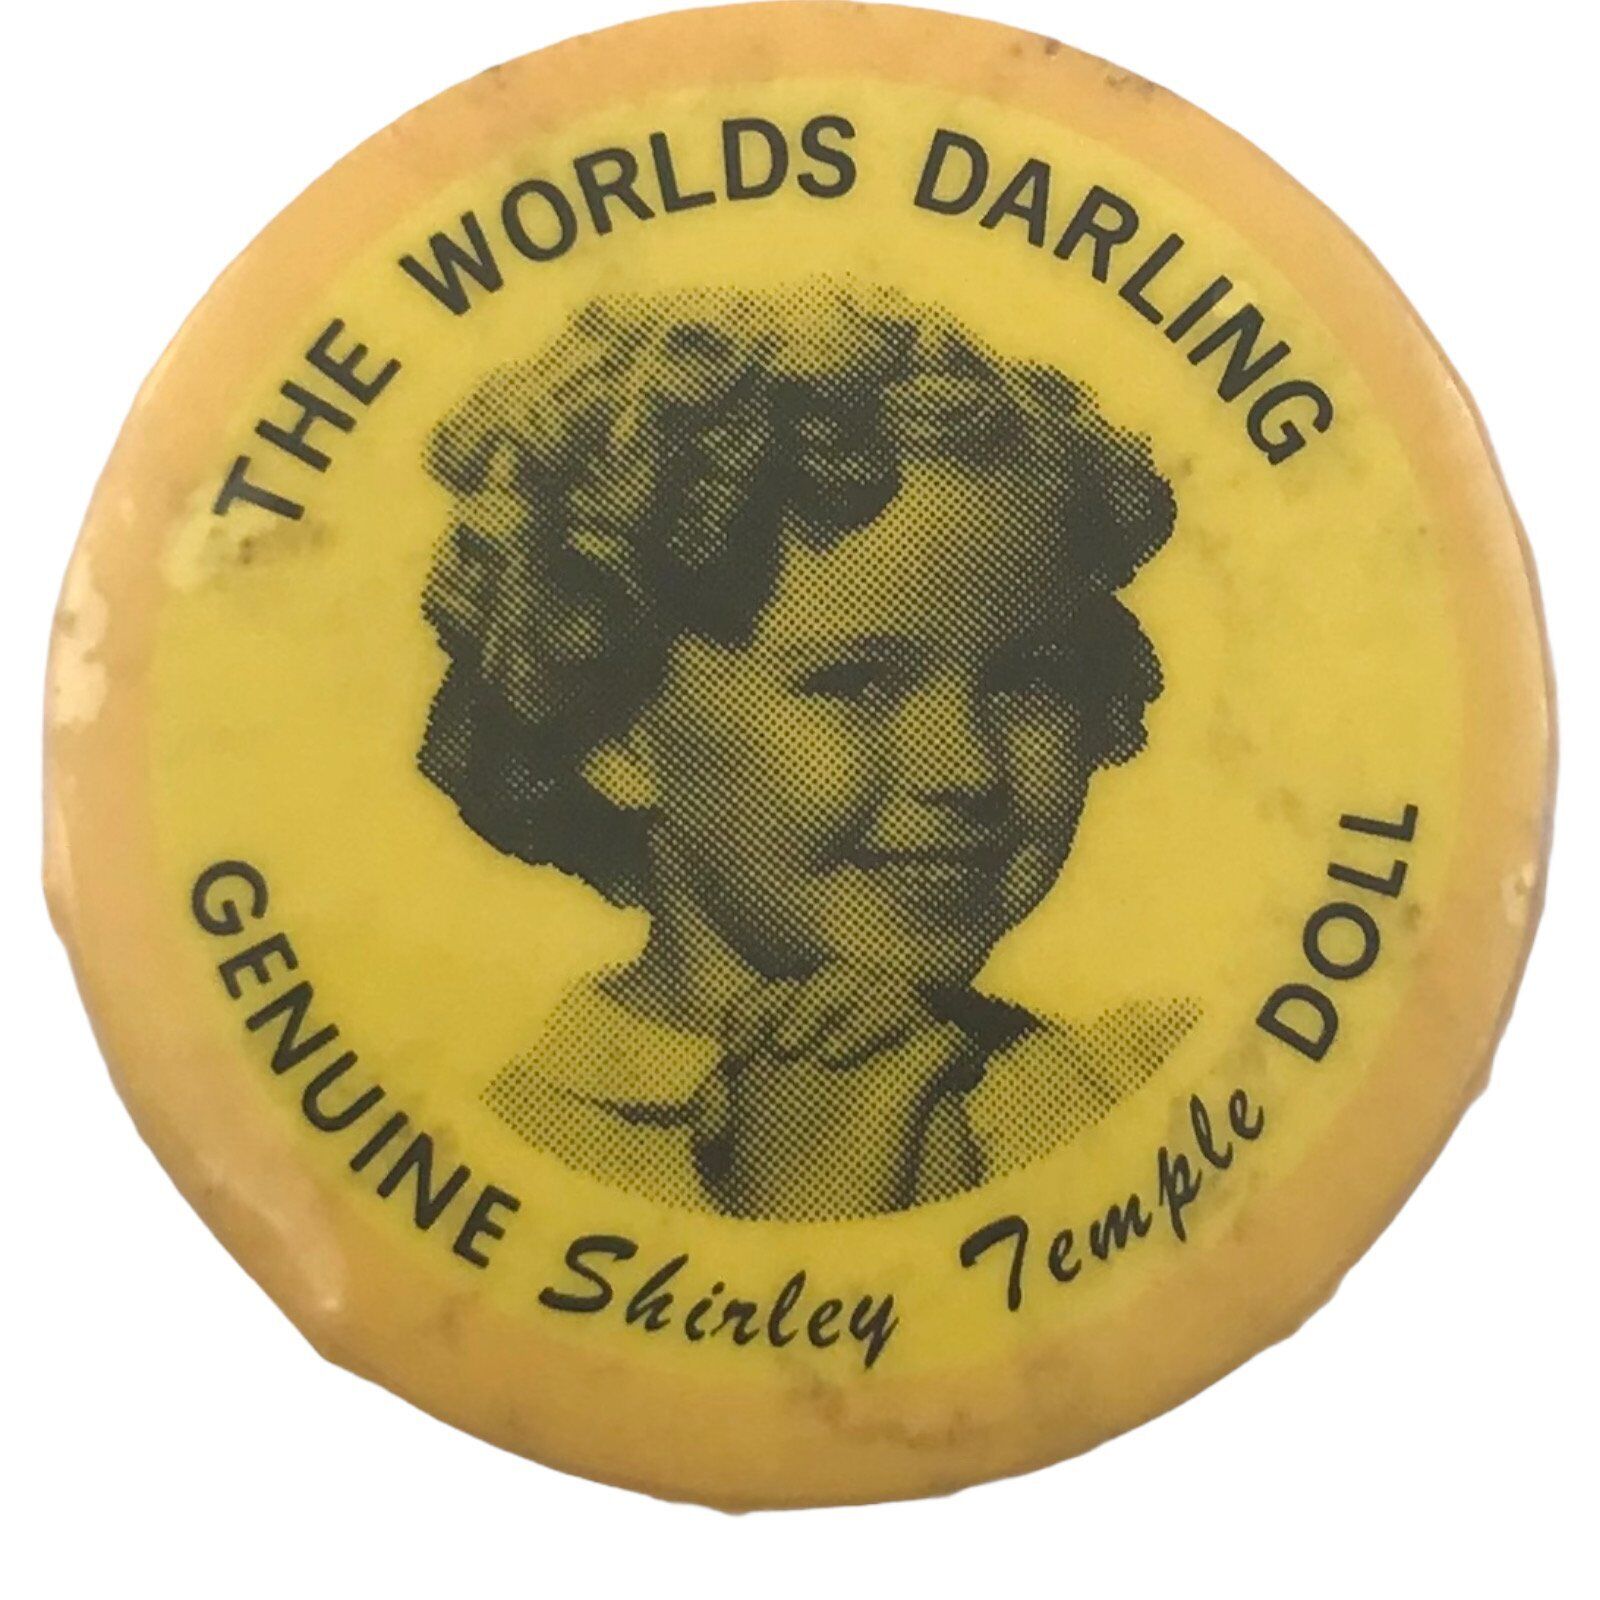 The World\'s Darling Shirley Temple Doll 1.25 Inch Vintage Yellow Pinback